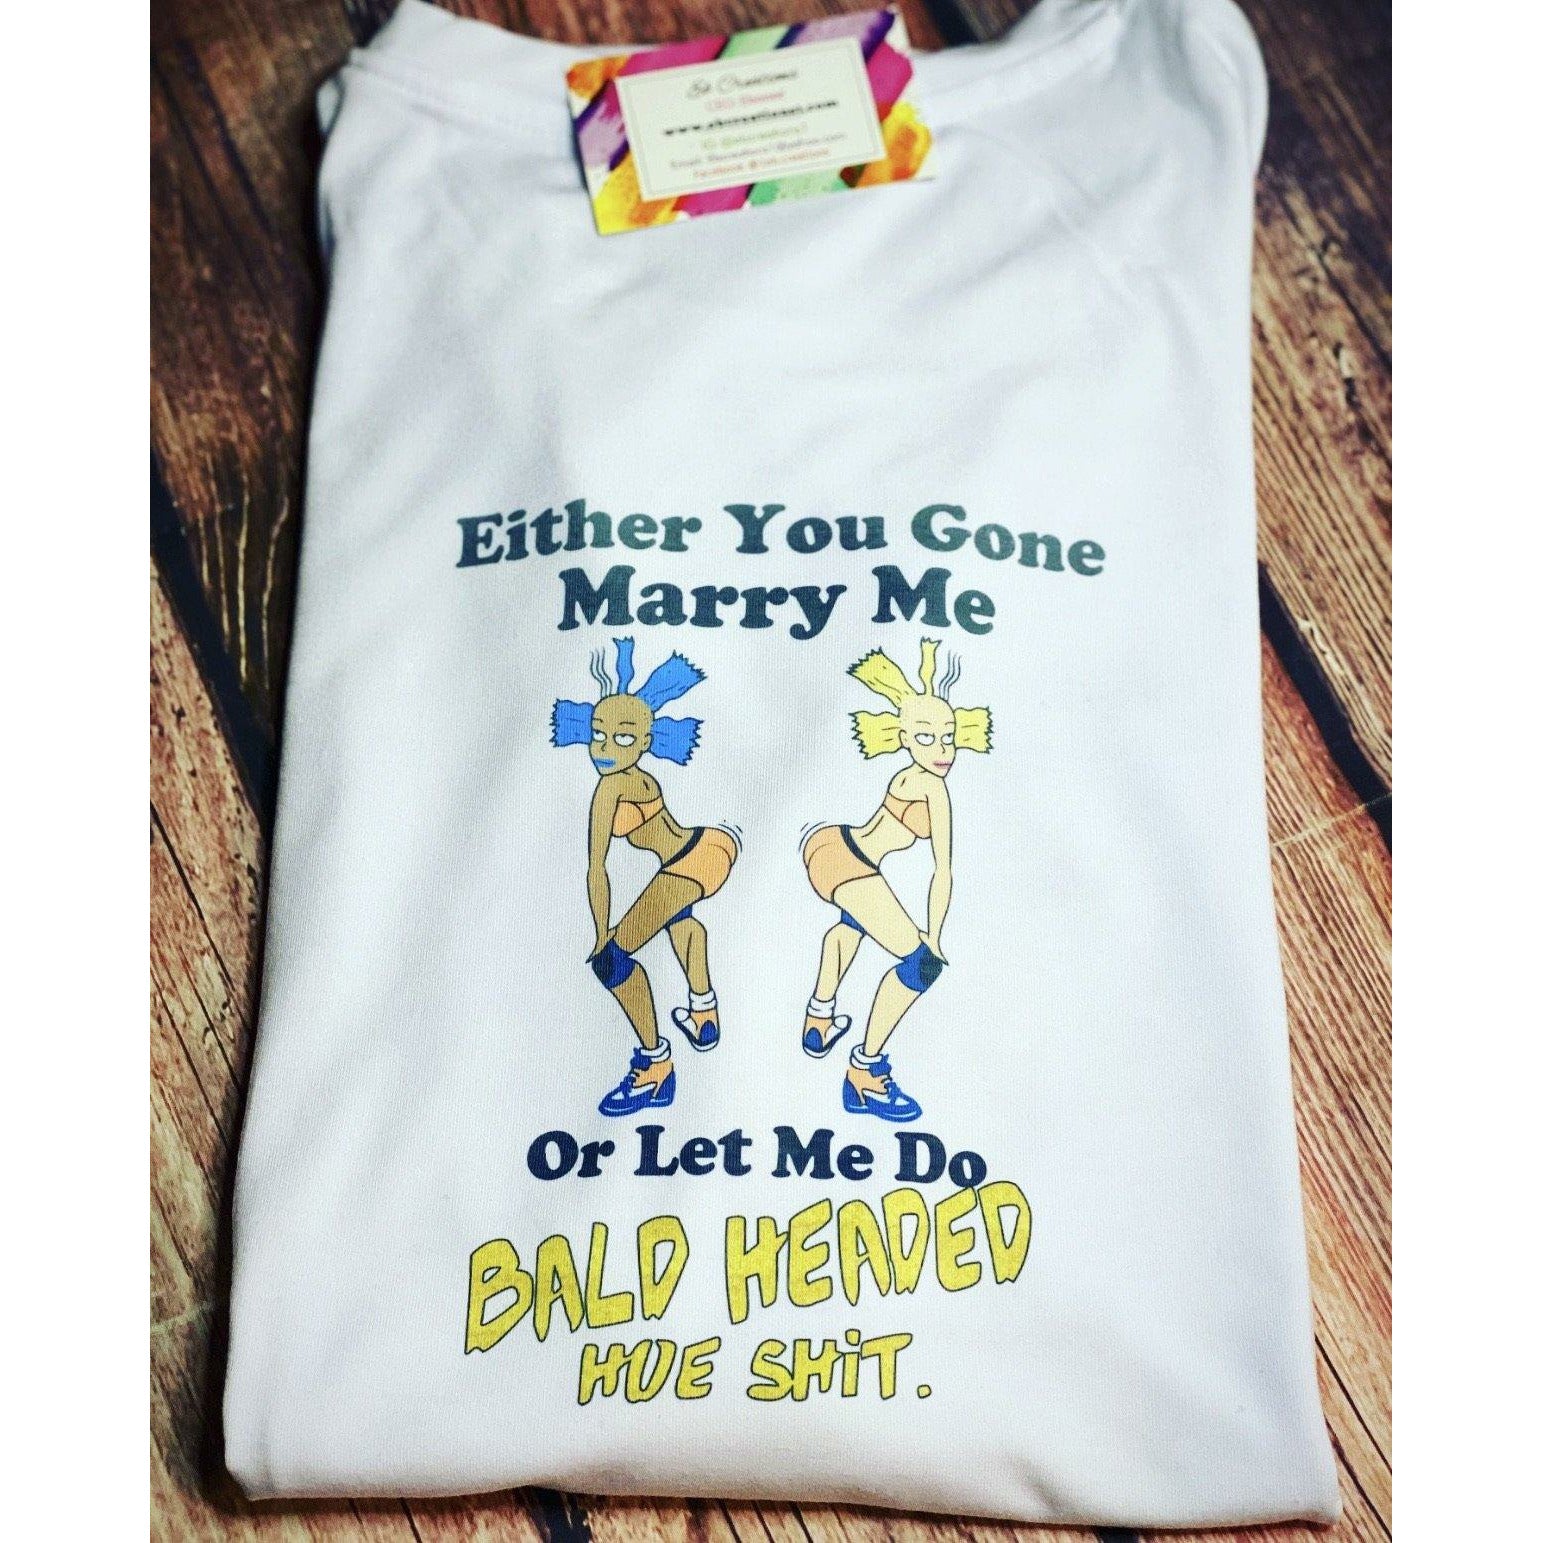 Either you gone marry me or let me do bald headed hoe shit T-Shirt - Eb Creations Either you gone marry me or let me do bald headed hoe shit T-Shirt